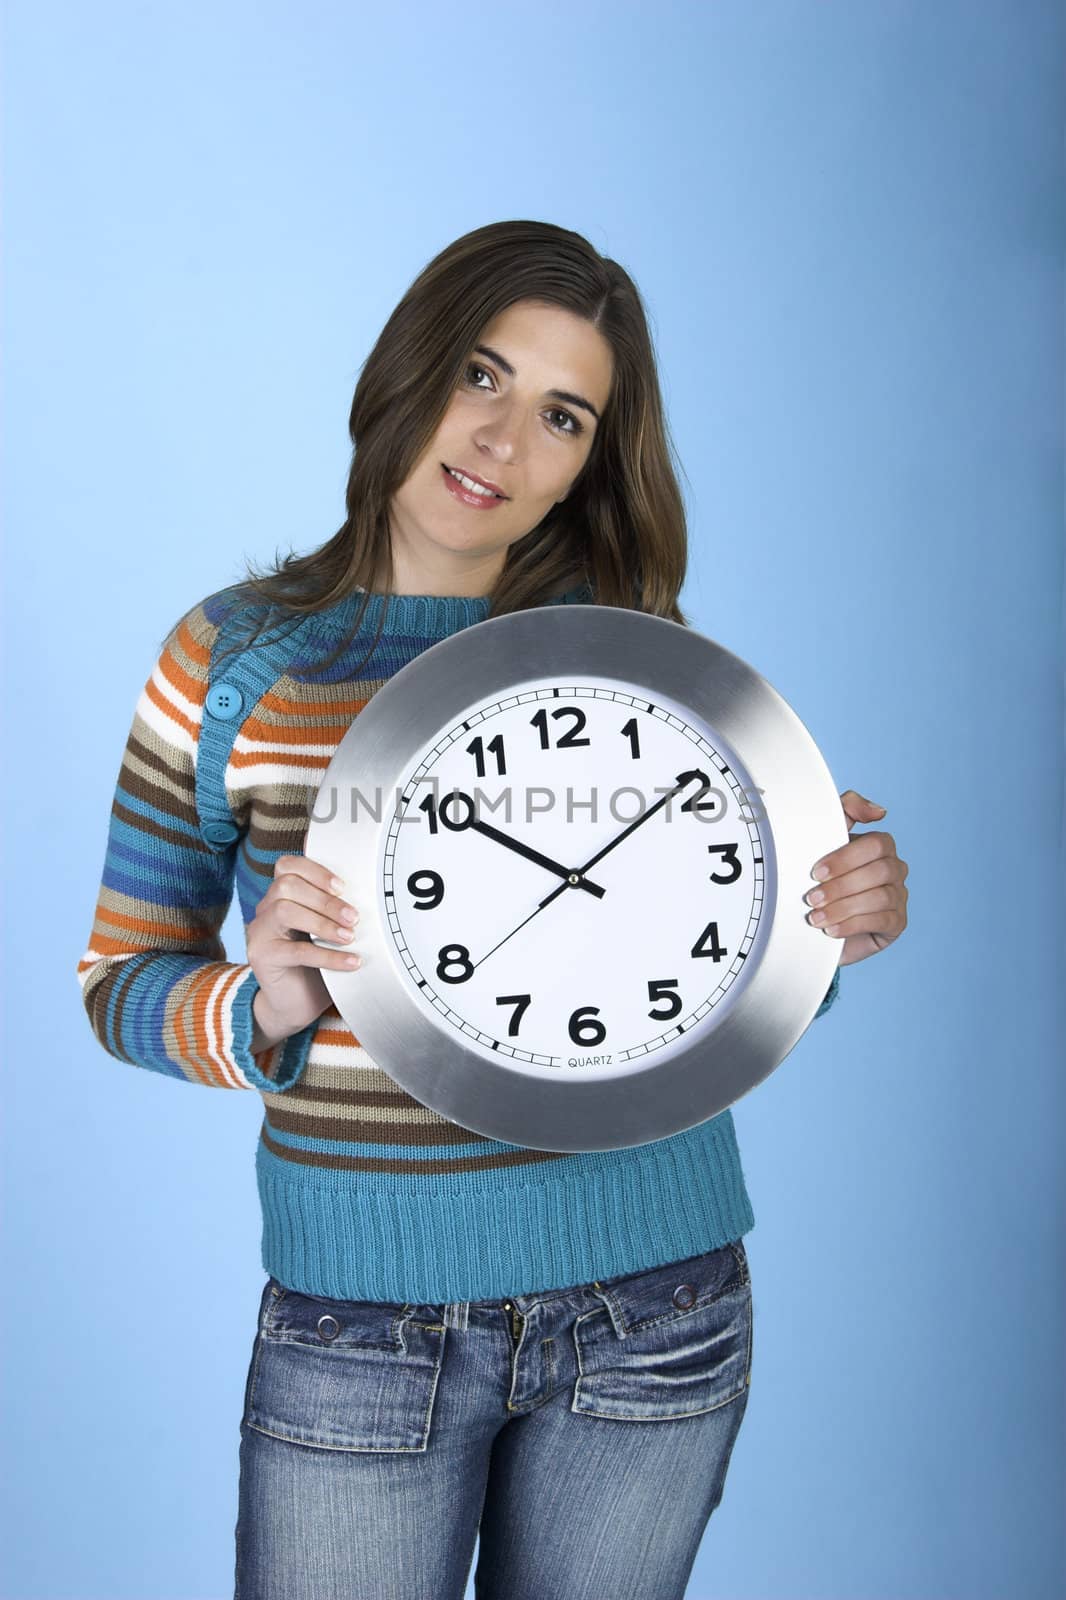 Woman holding a clock on a blue background